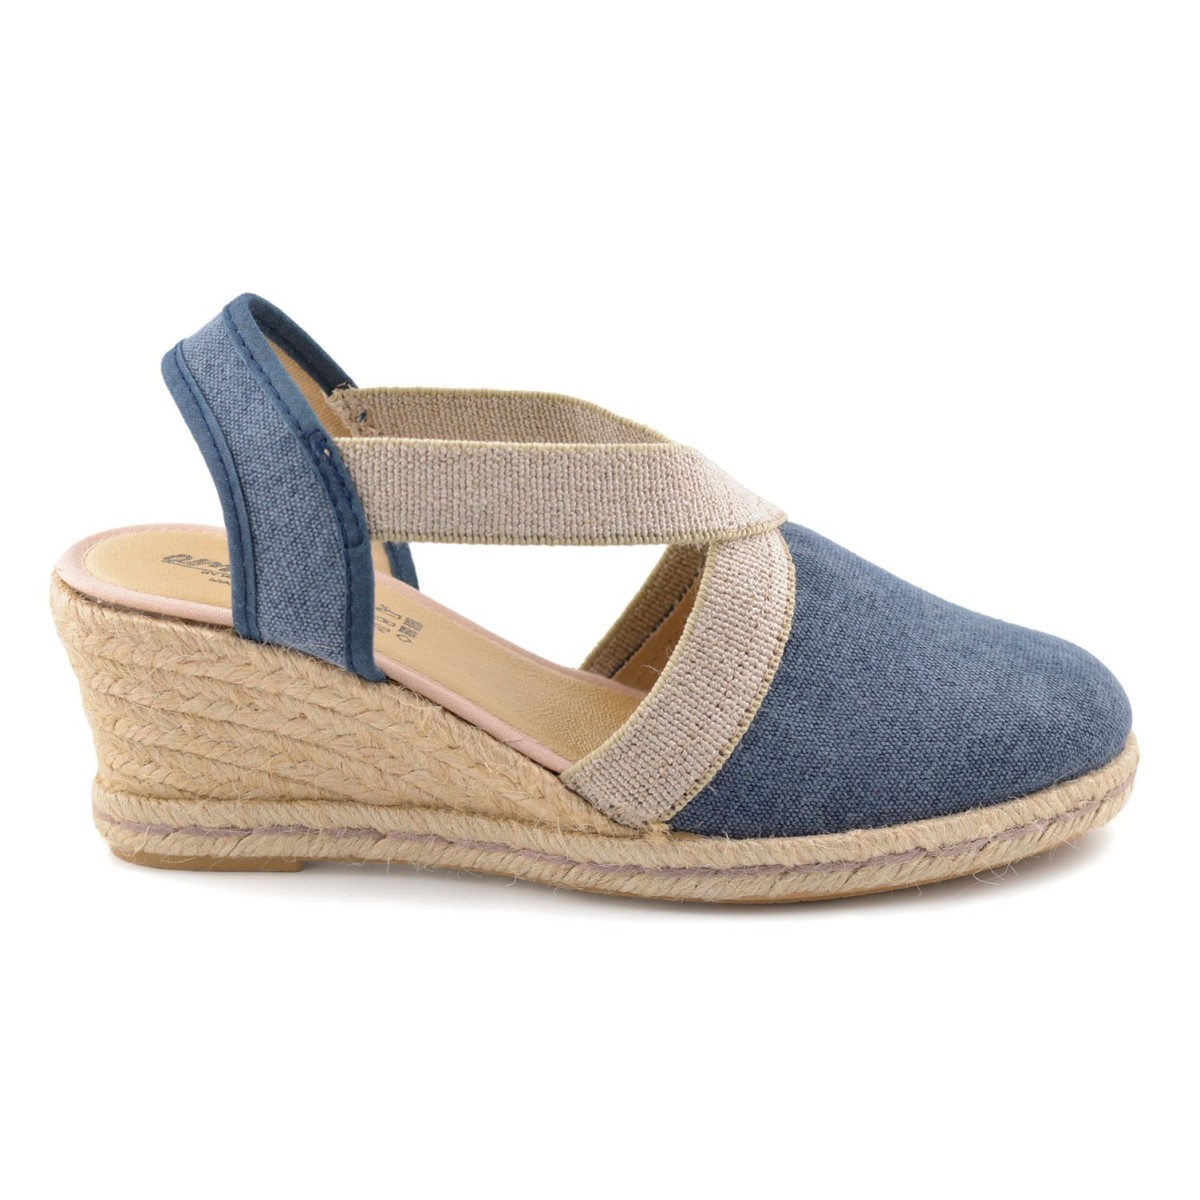 Blue espadrilles with jute wedge by Amelie